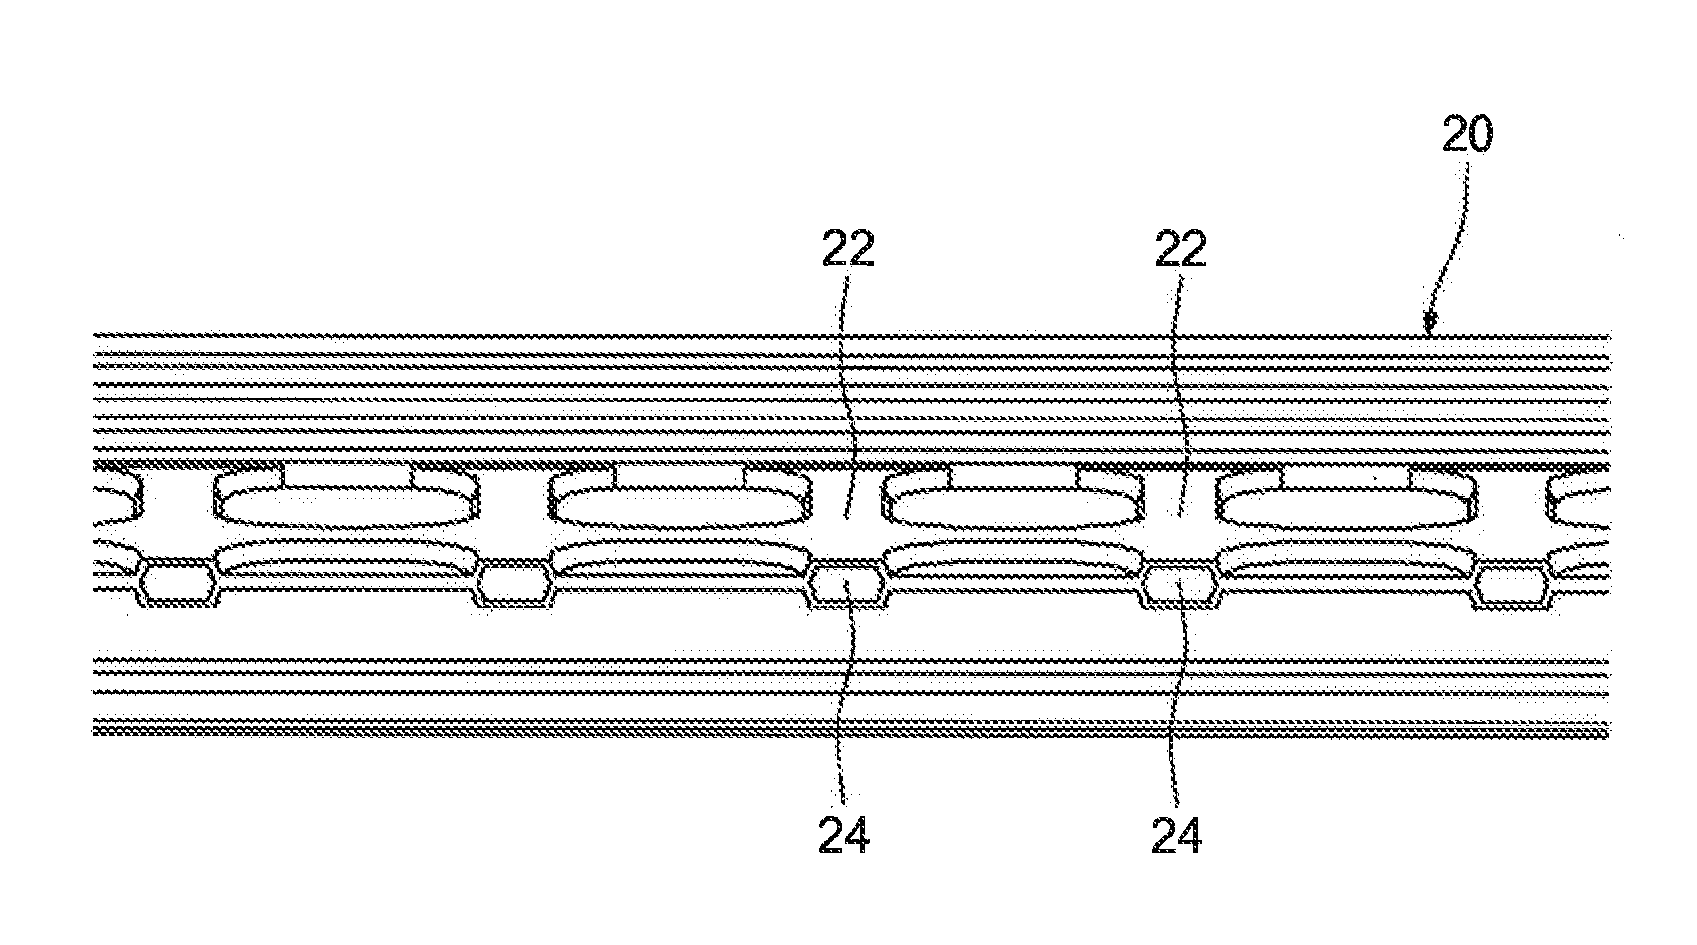 Fuel-cell stack comprising a stack of cells and bipolar conductive plates